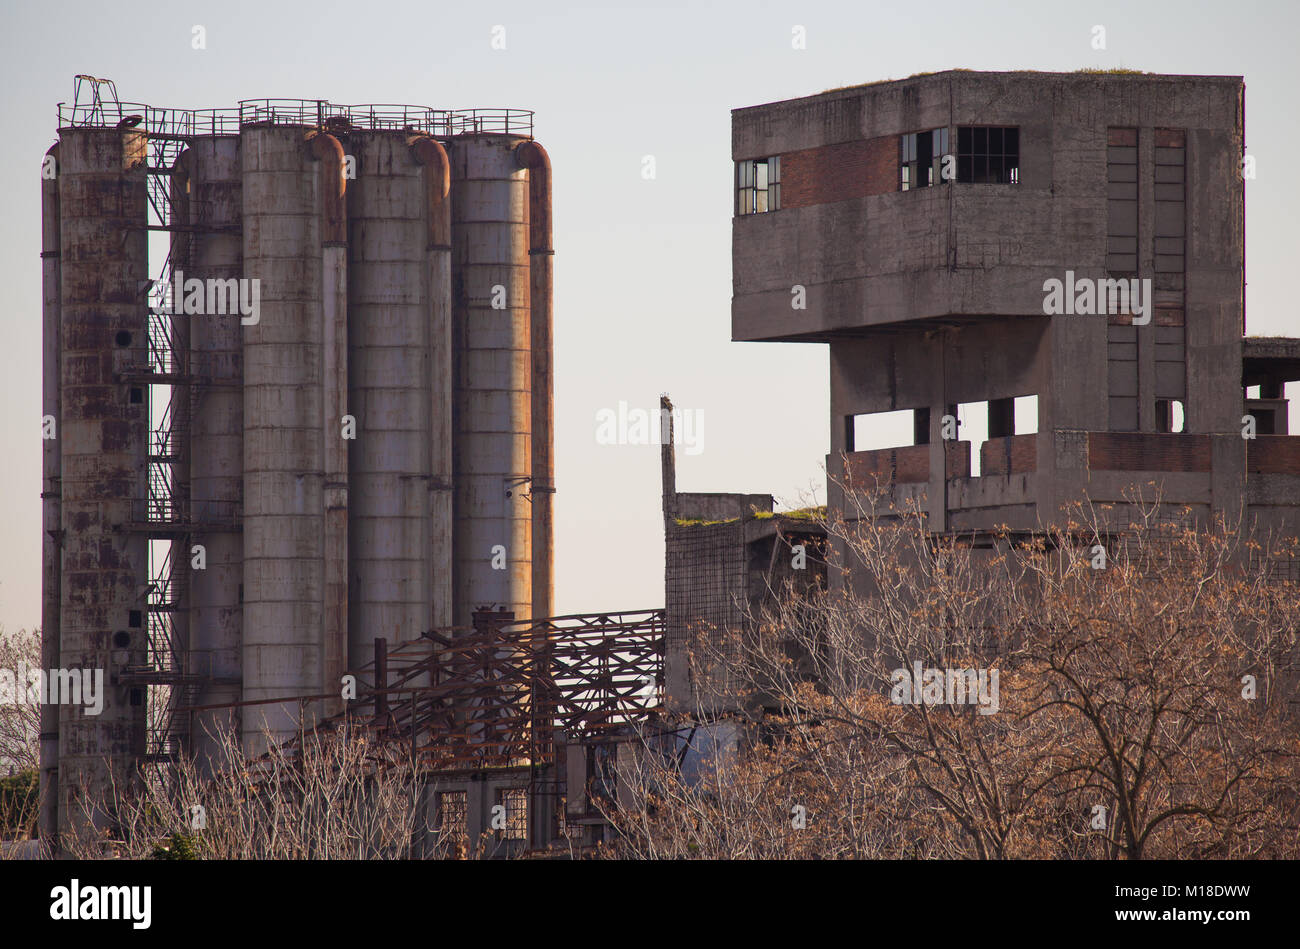 ARCHEOLOGY OF INDUSTRIAL ARCHITECTURE: OLD SILOS AND FACTORY STRUCTURE IN OSTIENSE DISTRICT (ROME, ITALY) Stock Photo